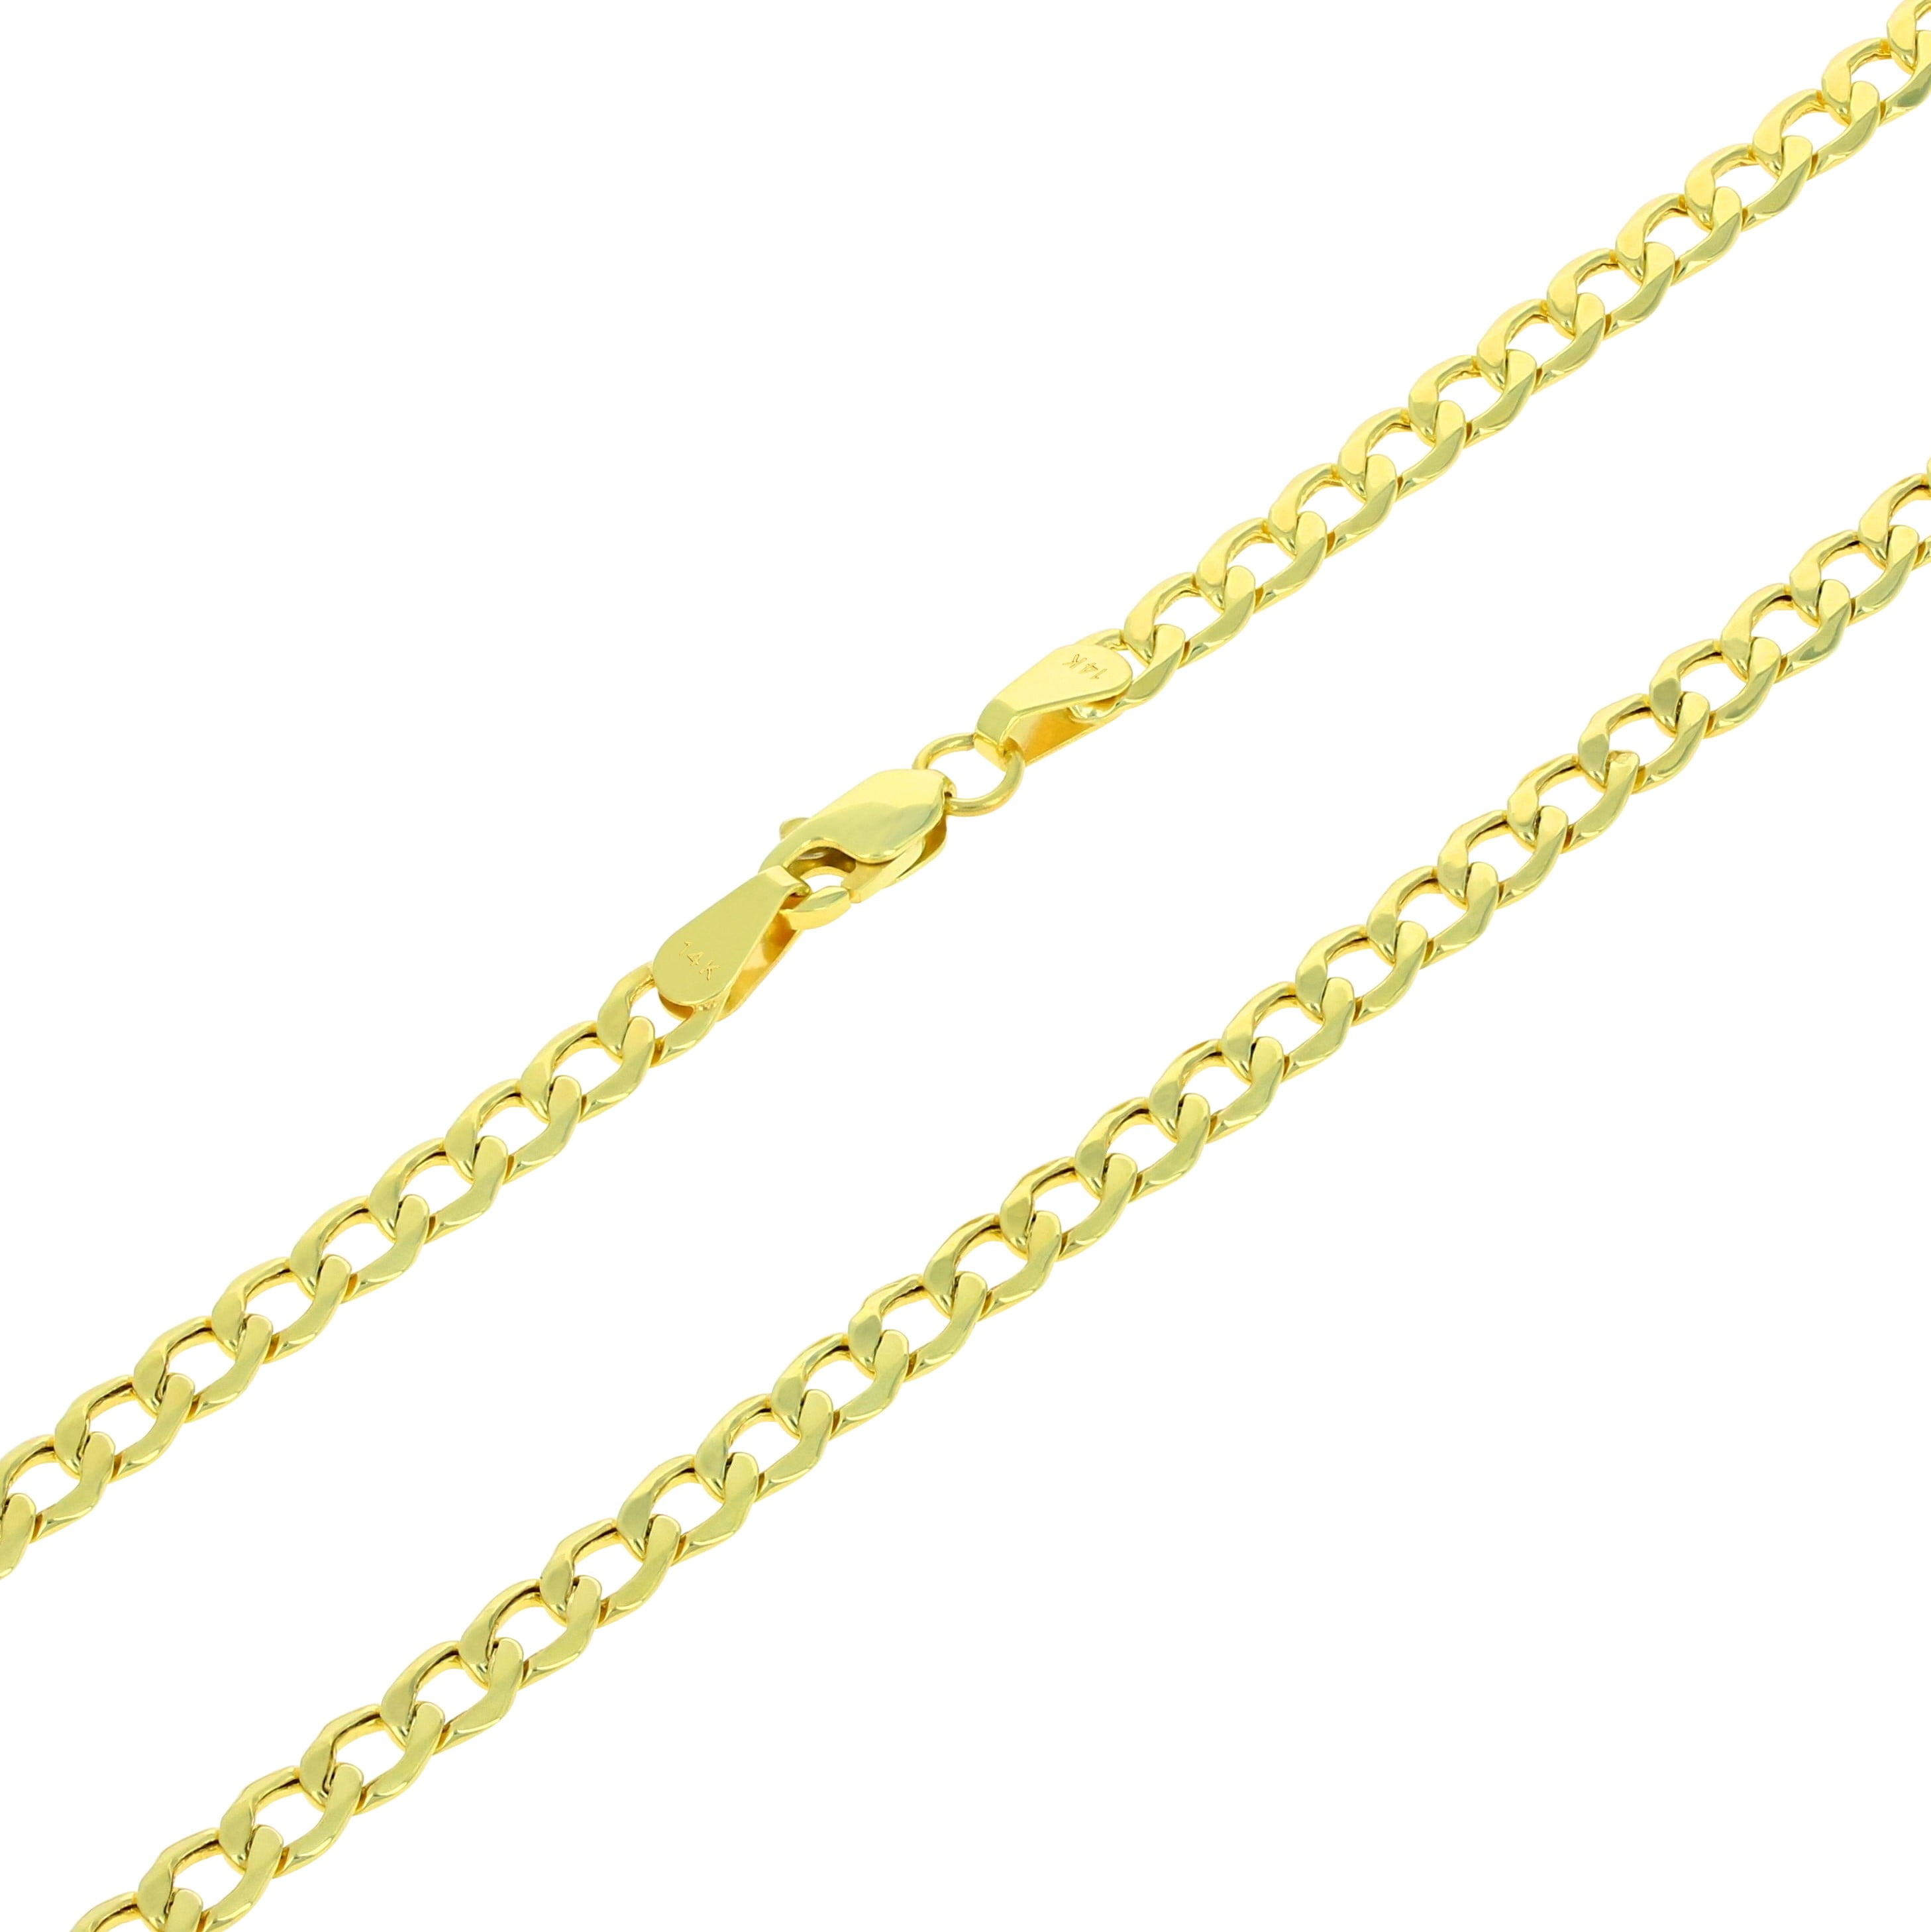 Lavari Jewelers Women's Replacement Chain with Spring Ring Clasp, 14K  Yellow Gold, 0.6 MM Box Chain, 18 Inch